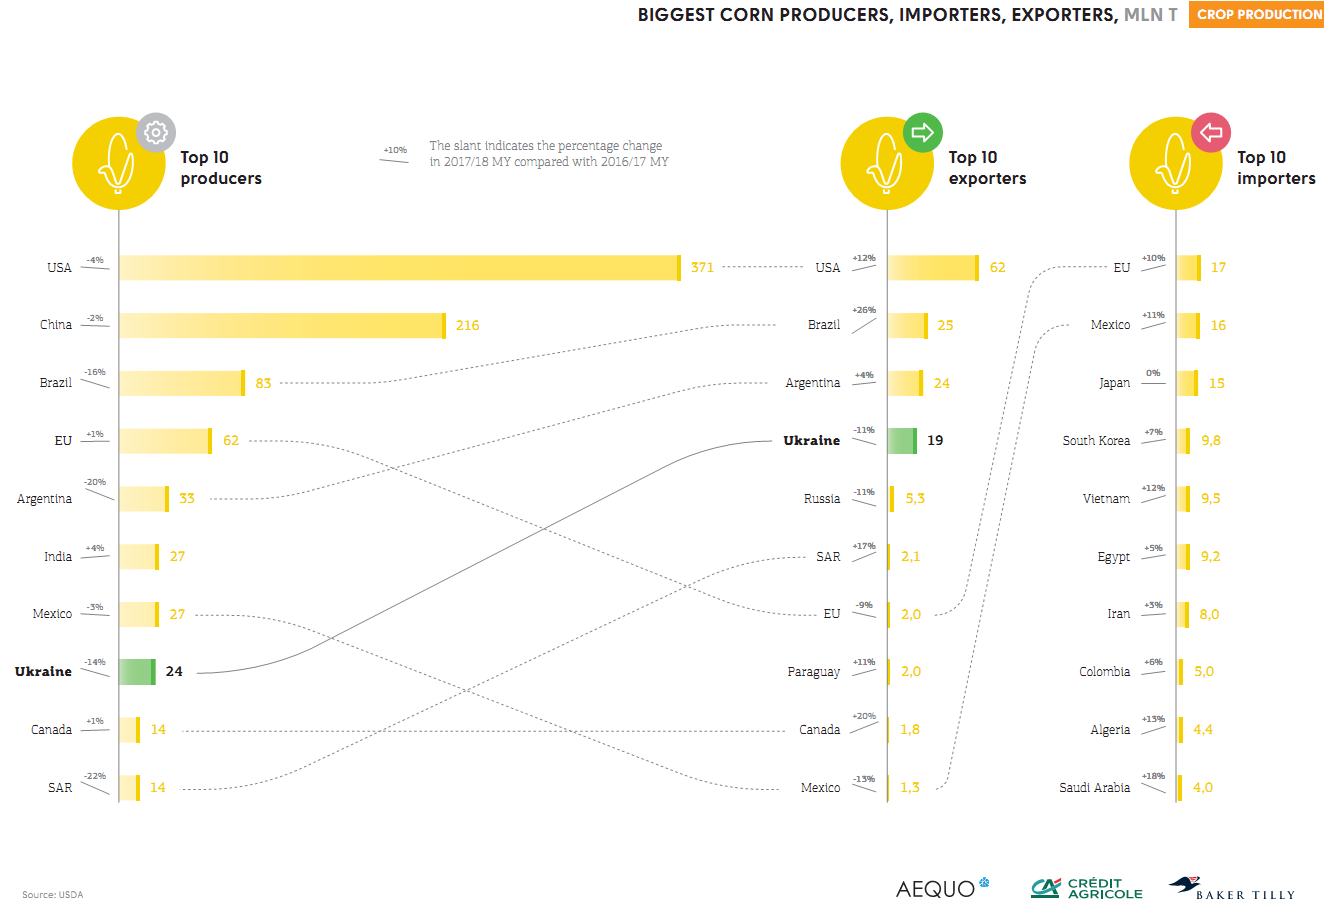 Major corn producers, importers and exporters (click for full resolution)